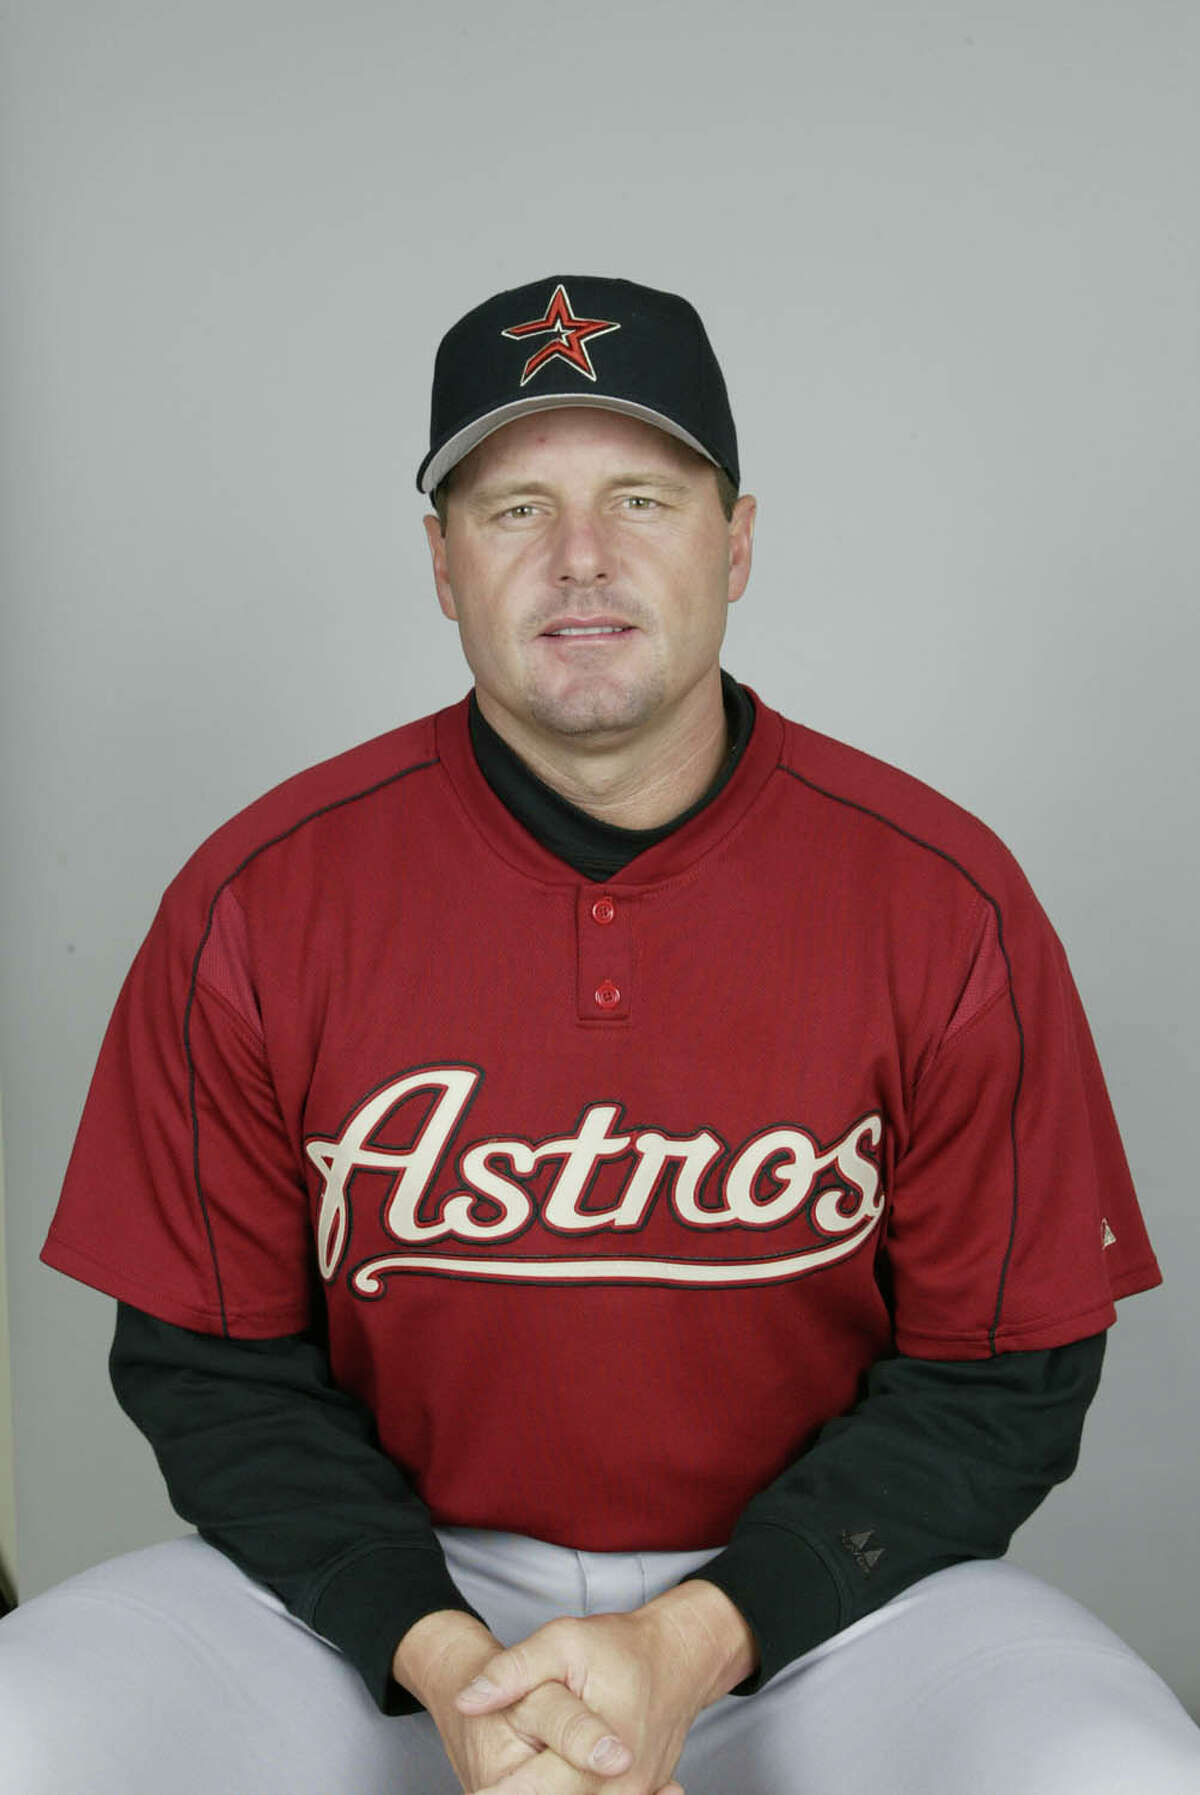 Roger Clemens through the years